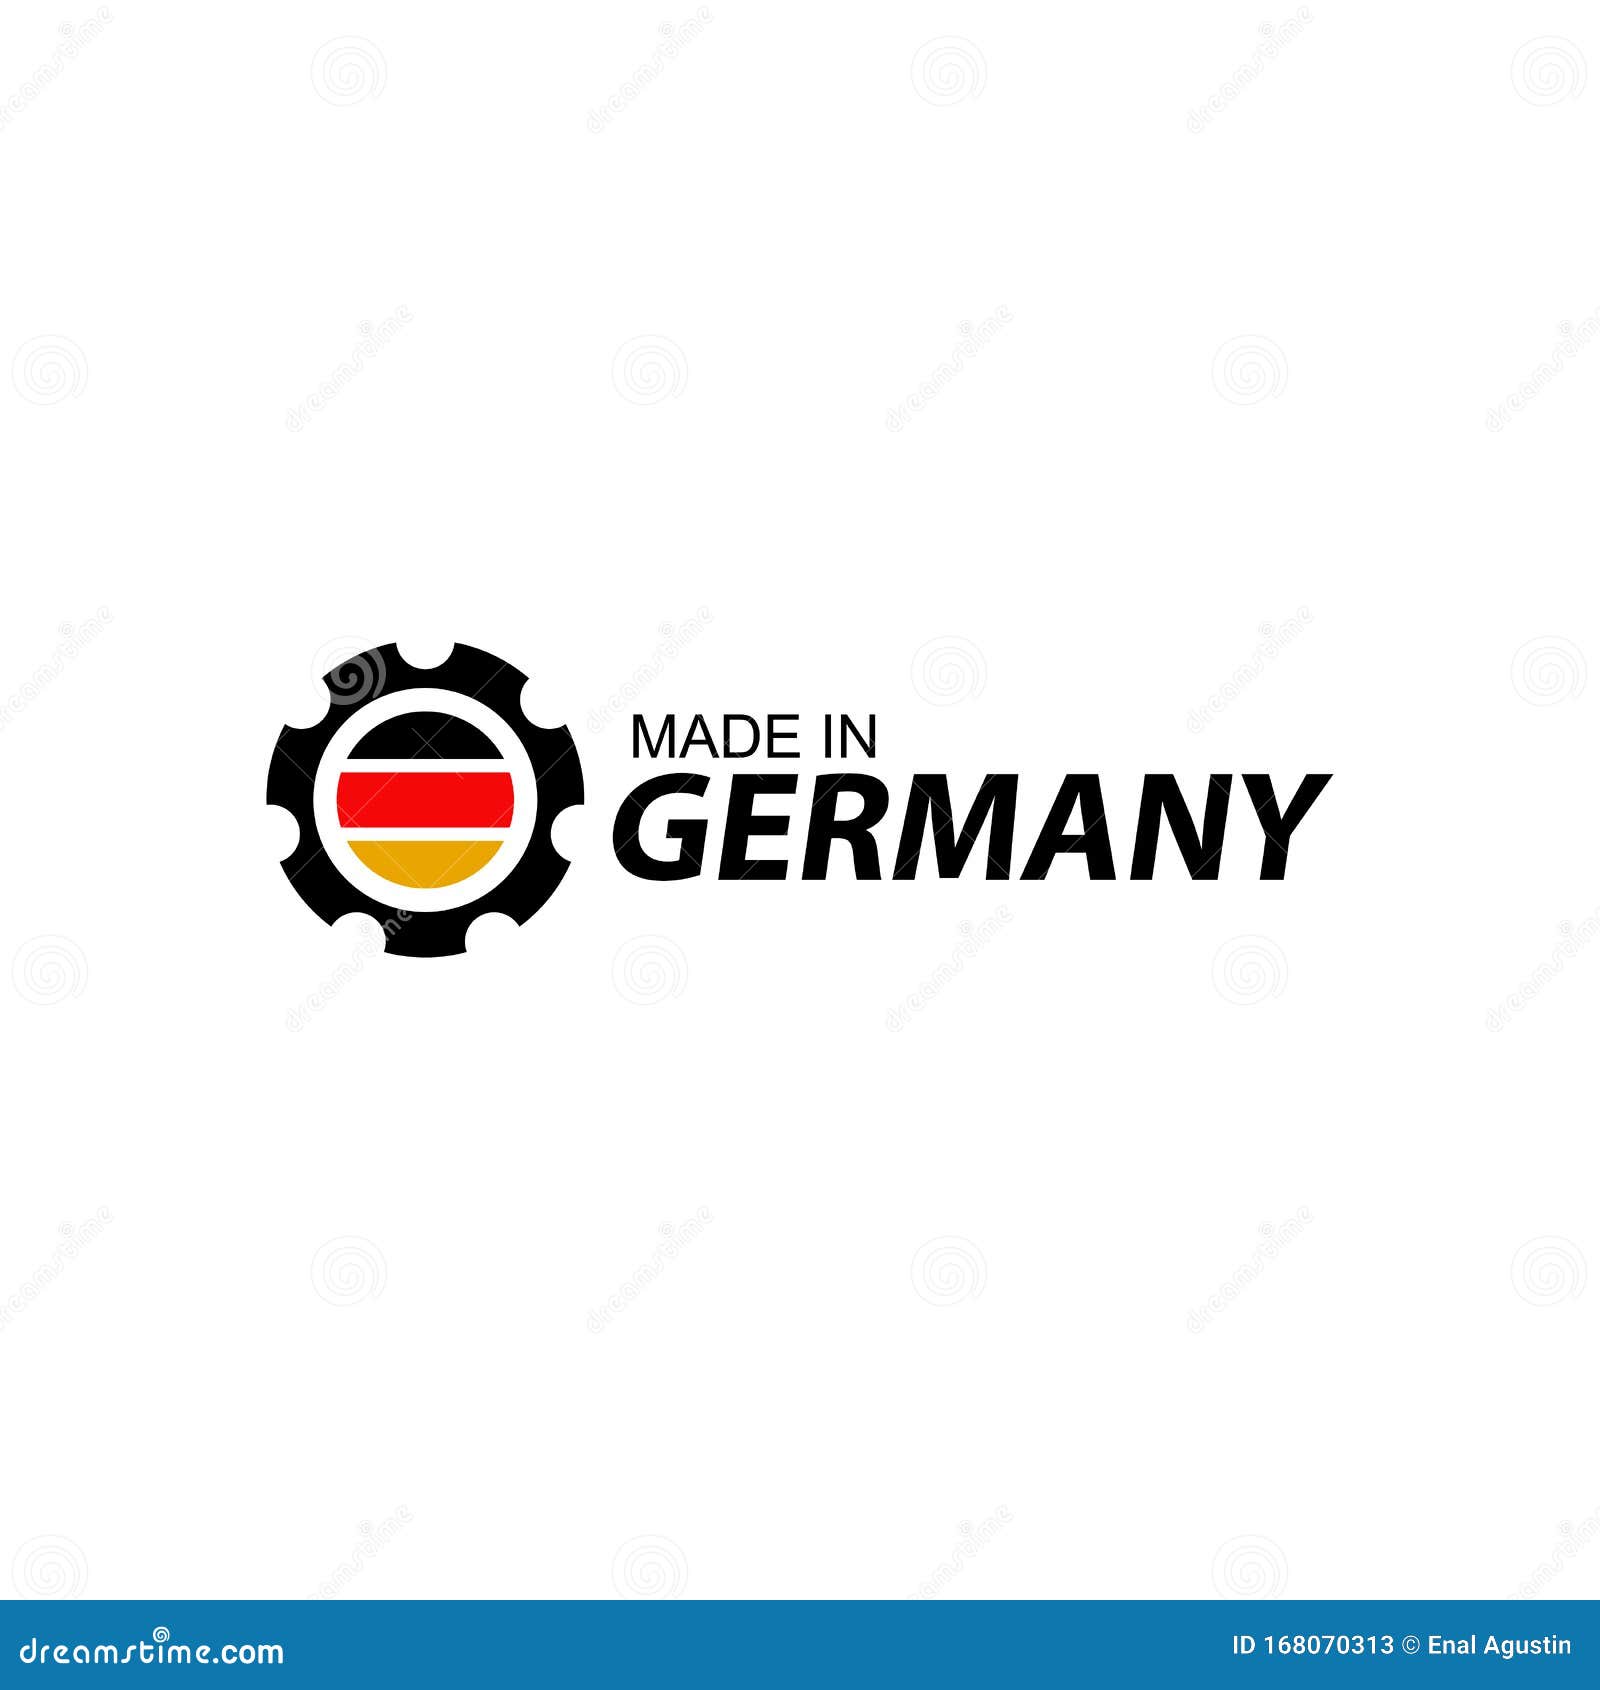 Emblem Of Made In Germany Product Item Logo Design Vector Template Stock Vector Illustration Of Quality Business 168070313